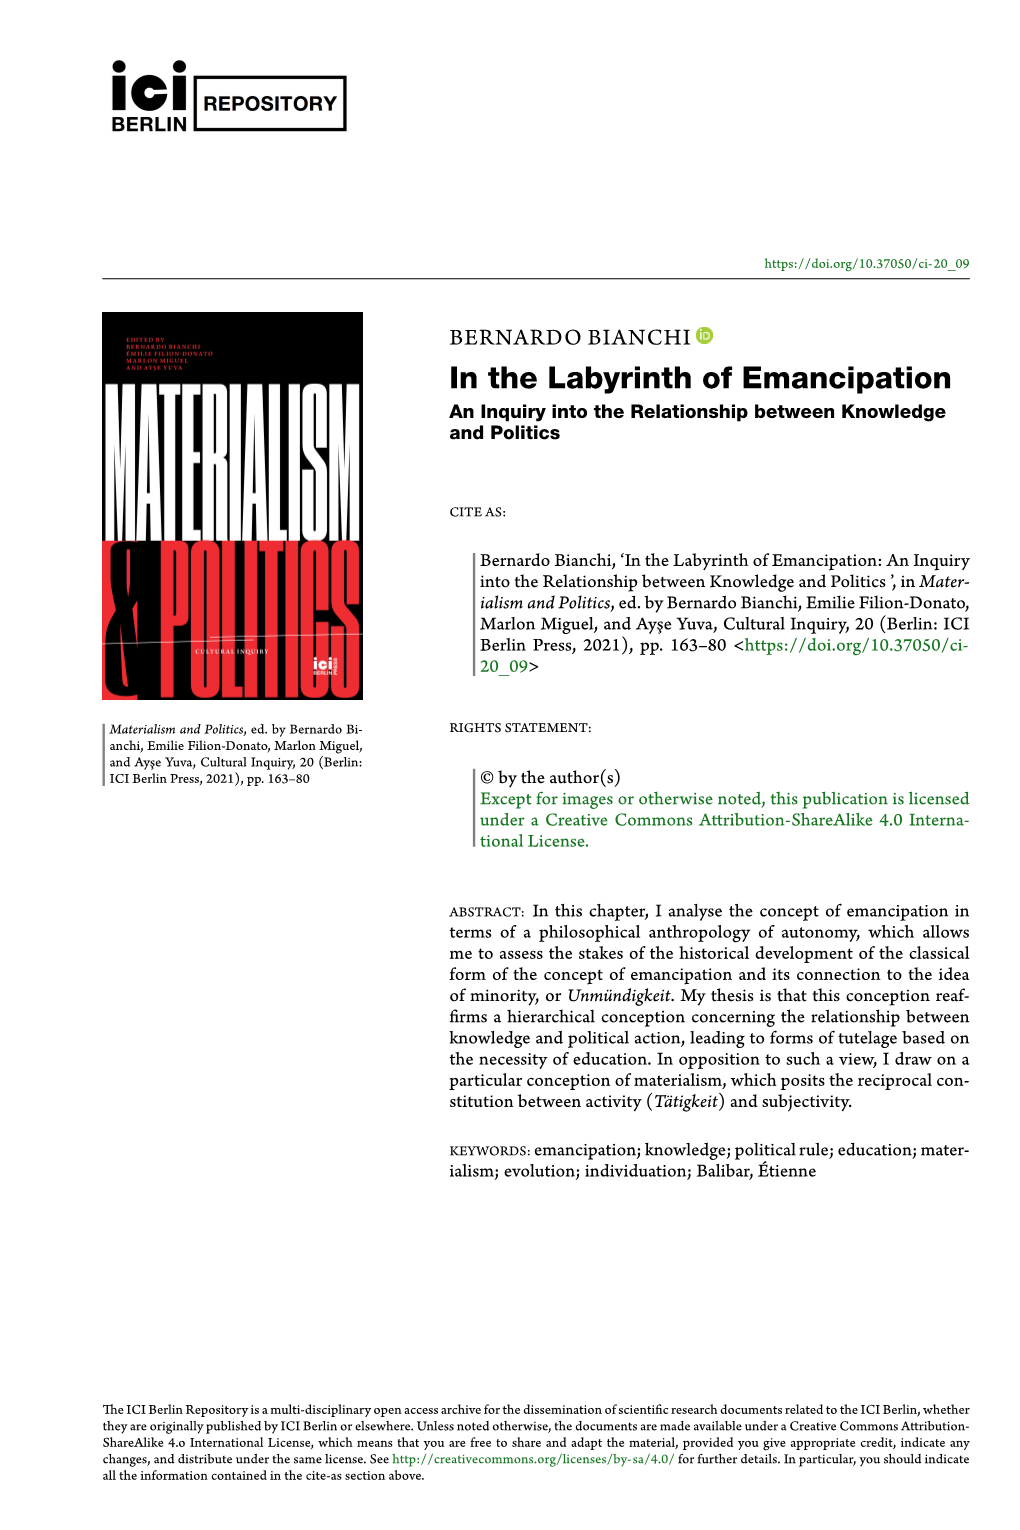 In the Labyrinth of Emancipation: an Inquiry Into the Relationship Between Knowledge and Politics ’, in Mater- Ialism and Politics, Ed